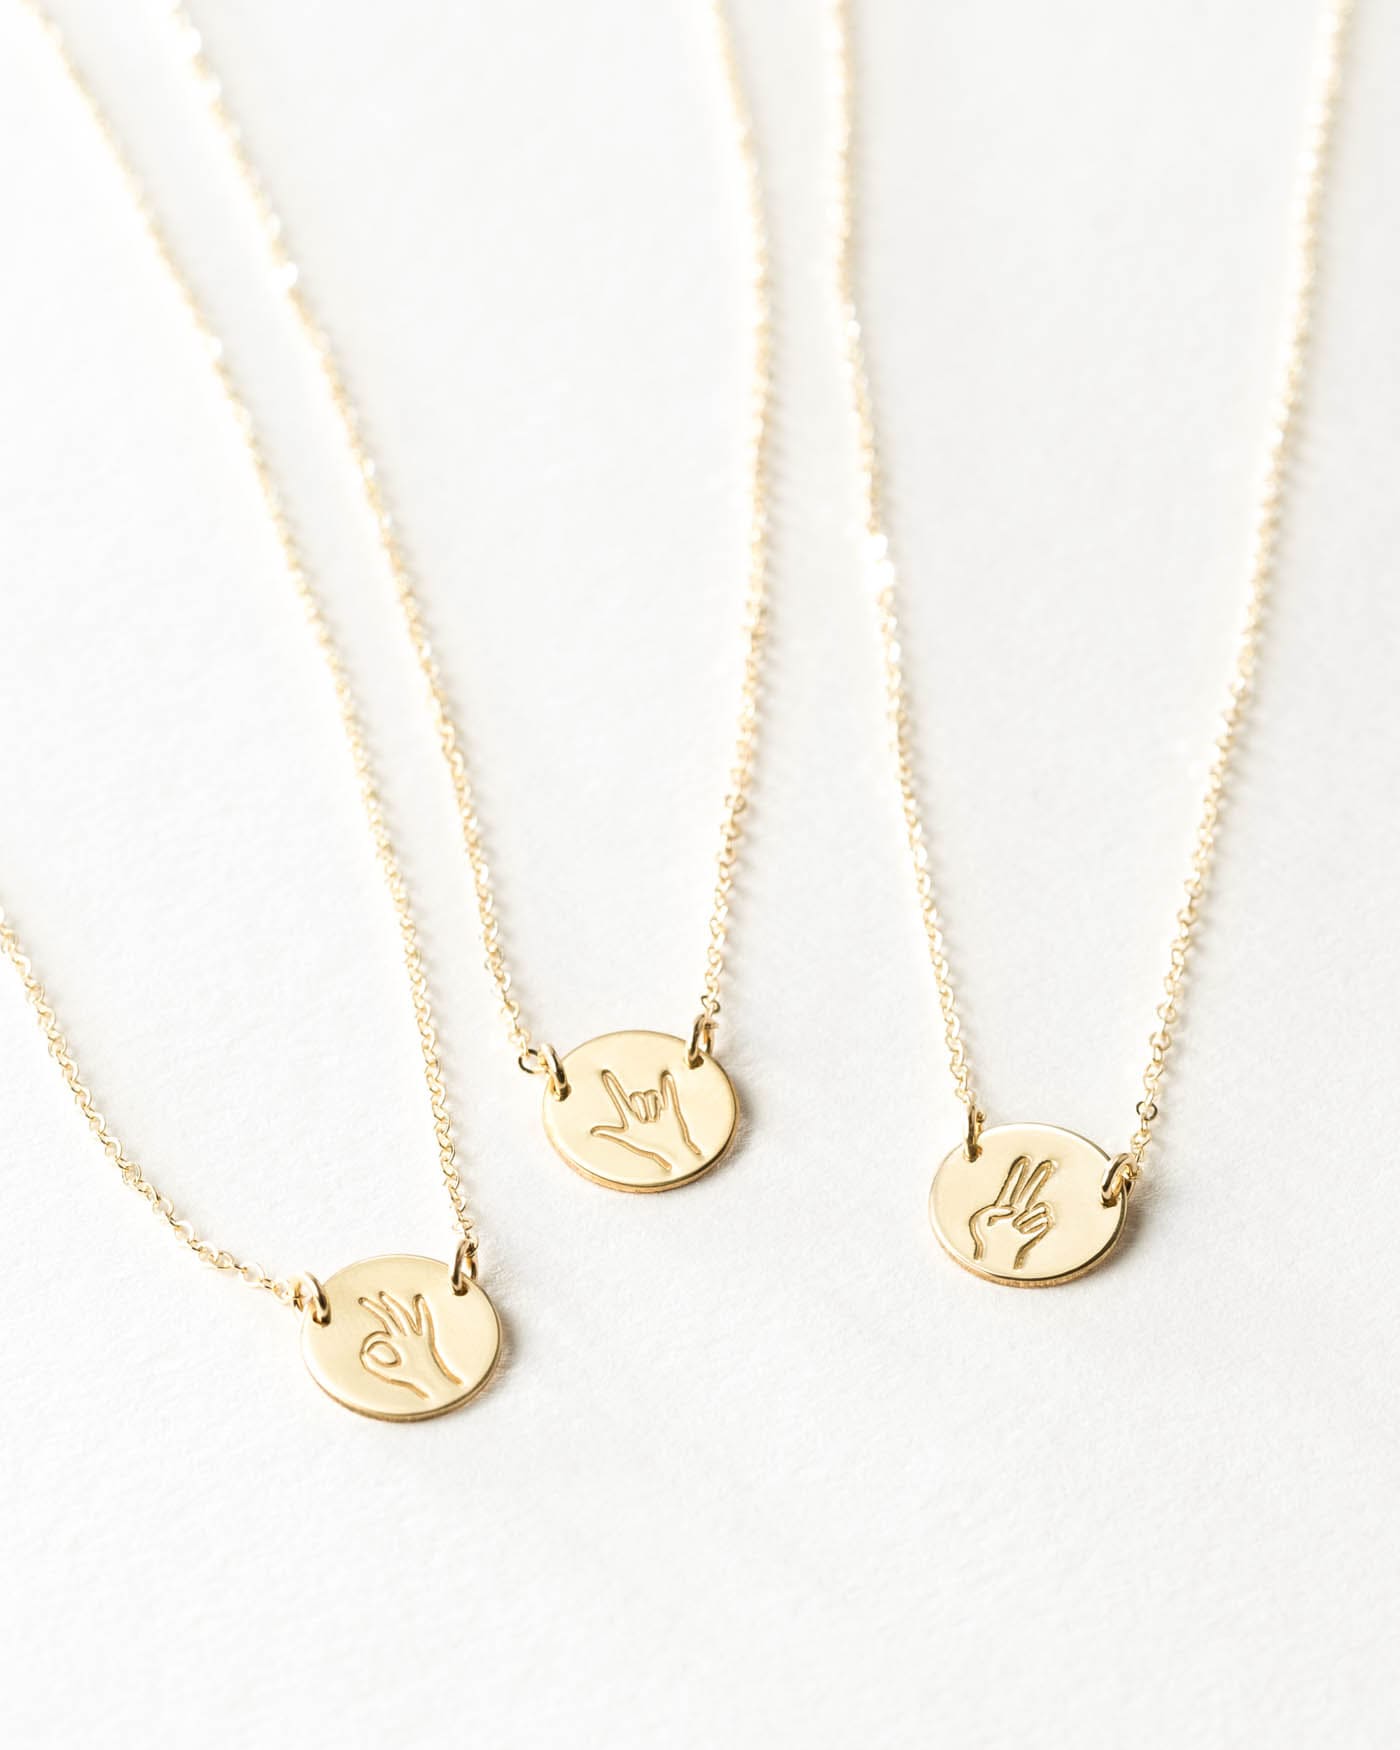 14K Yellow Gold Initial Charm Personalized Necklace - AH Jewelry Design